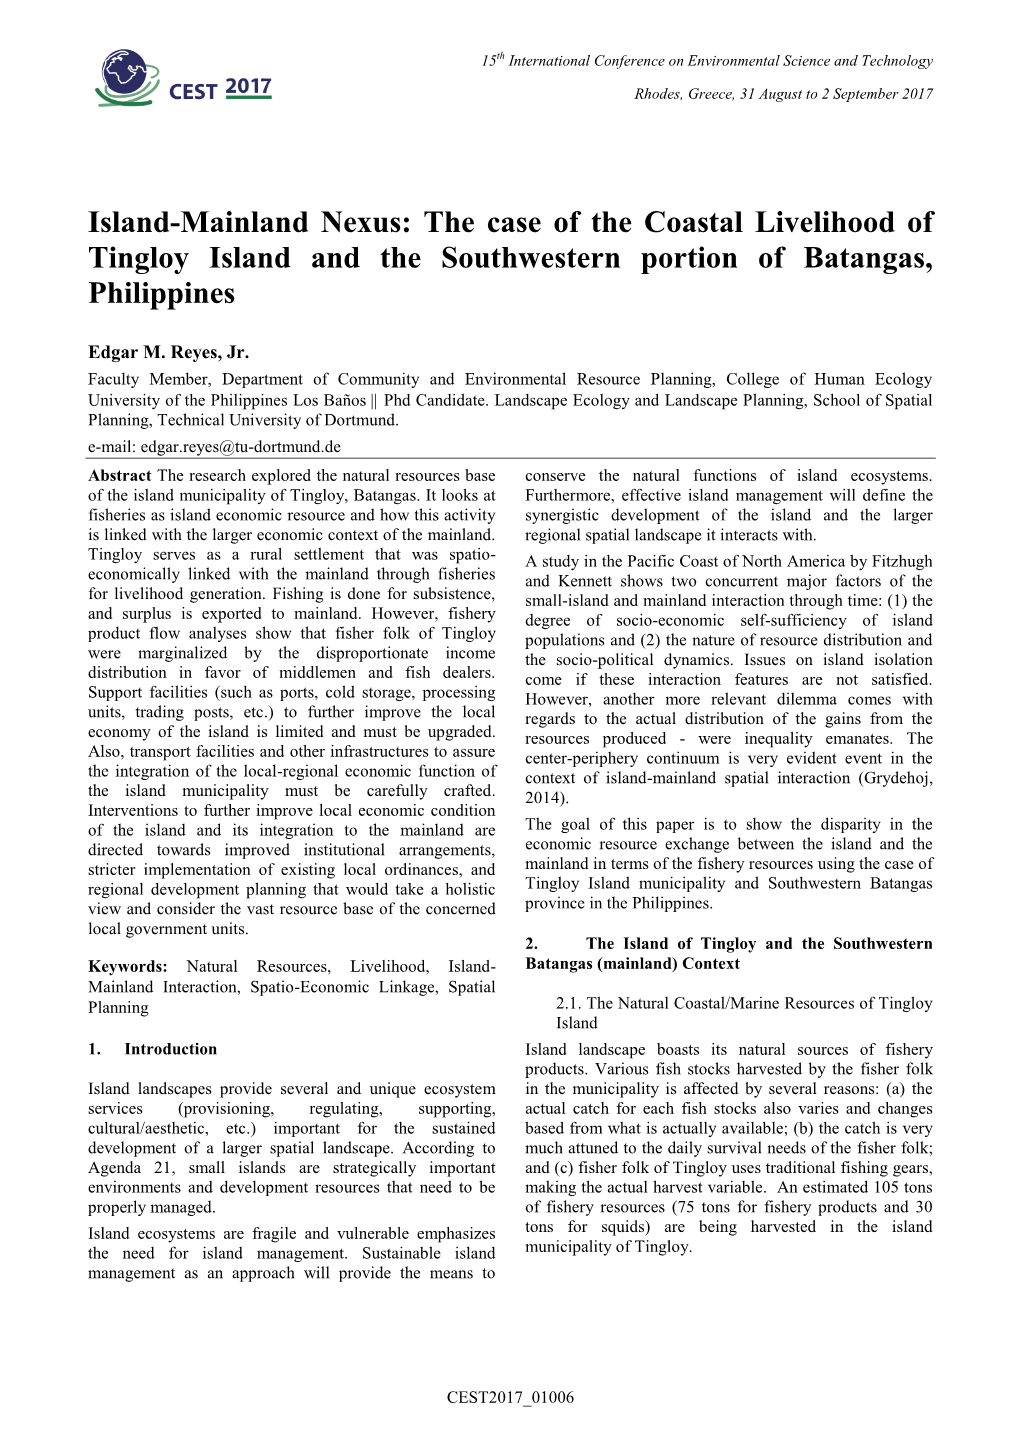 The Case of the Coastal Livelihood of Tingloy Island and the Southwestern Portion of Batangas, Philippines